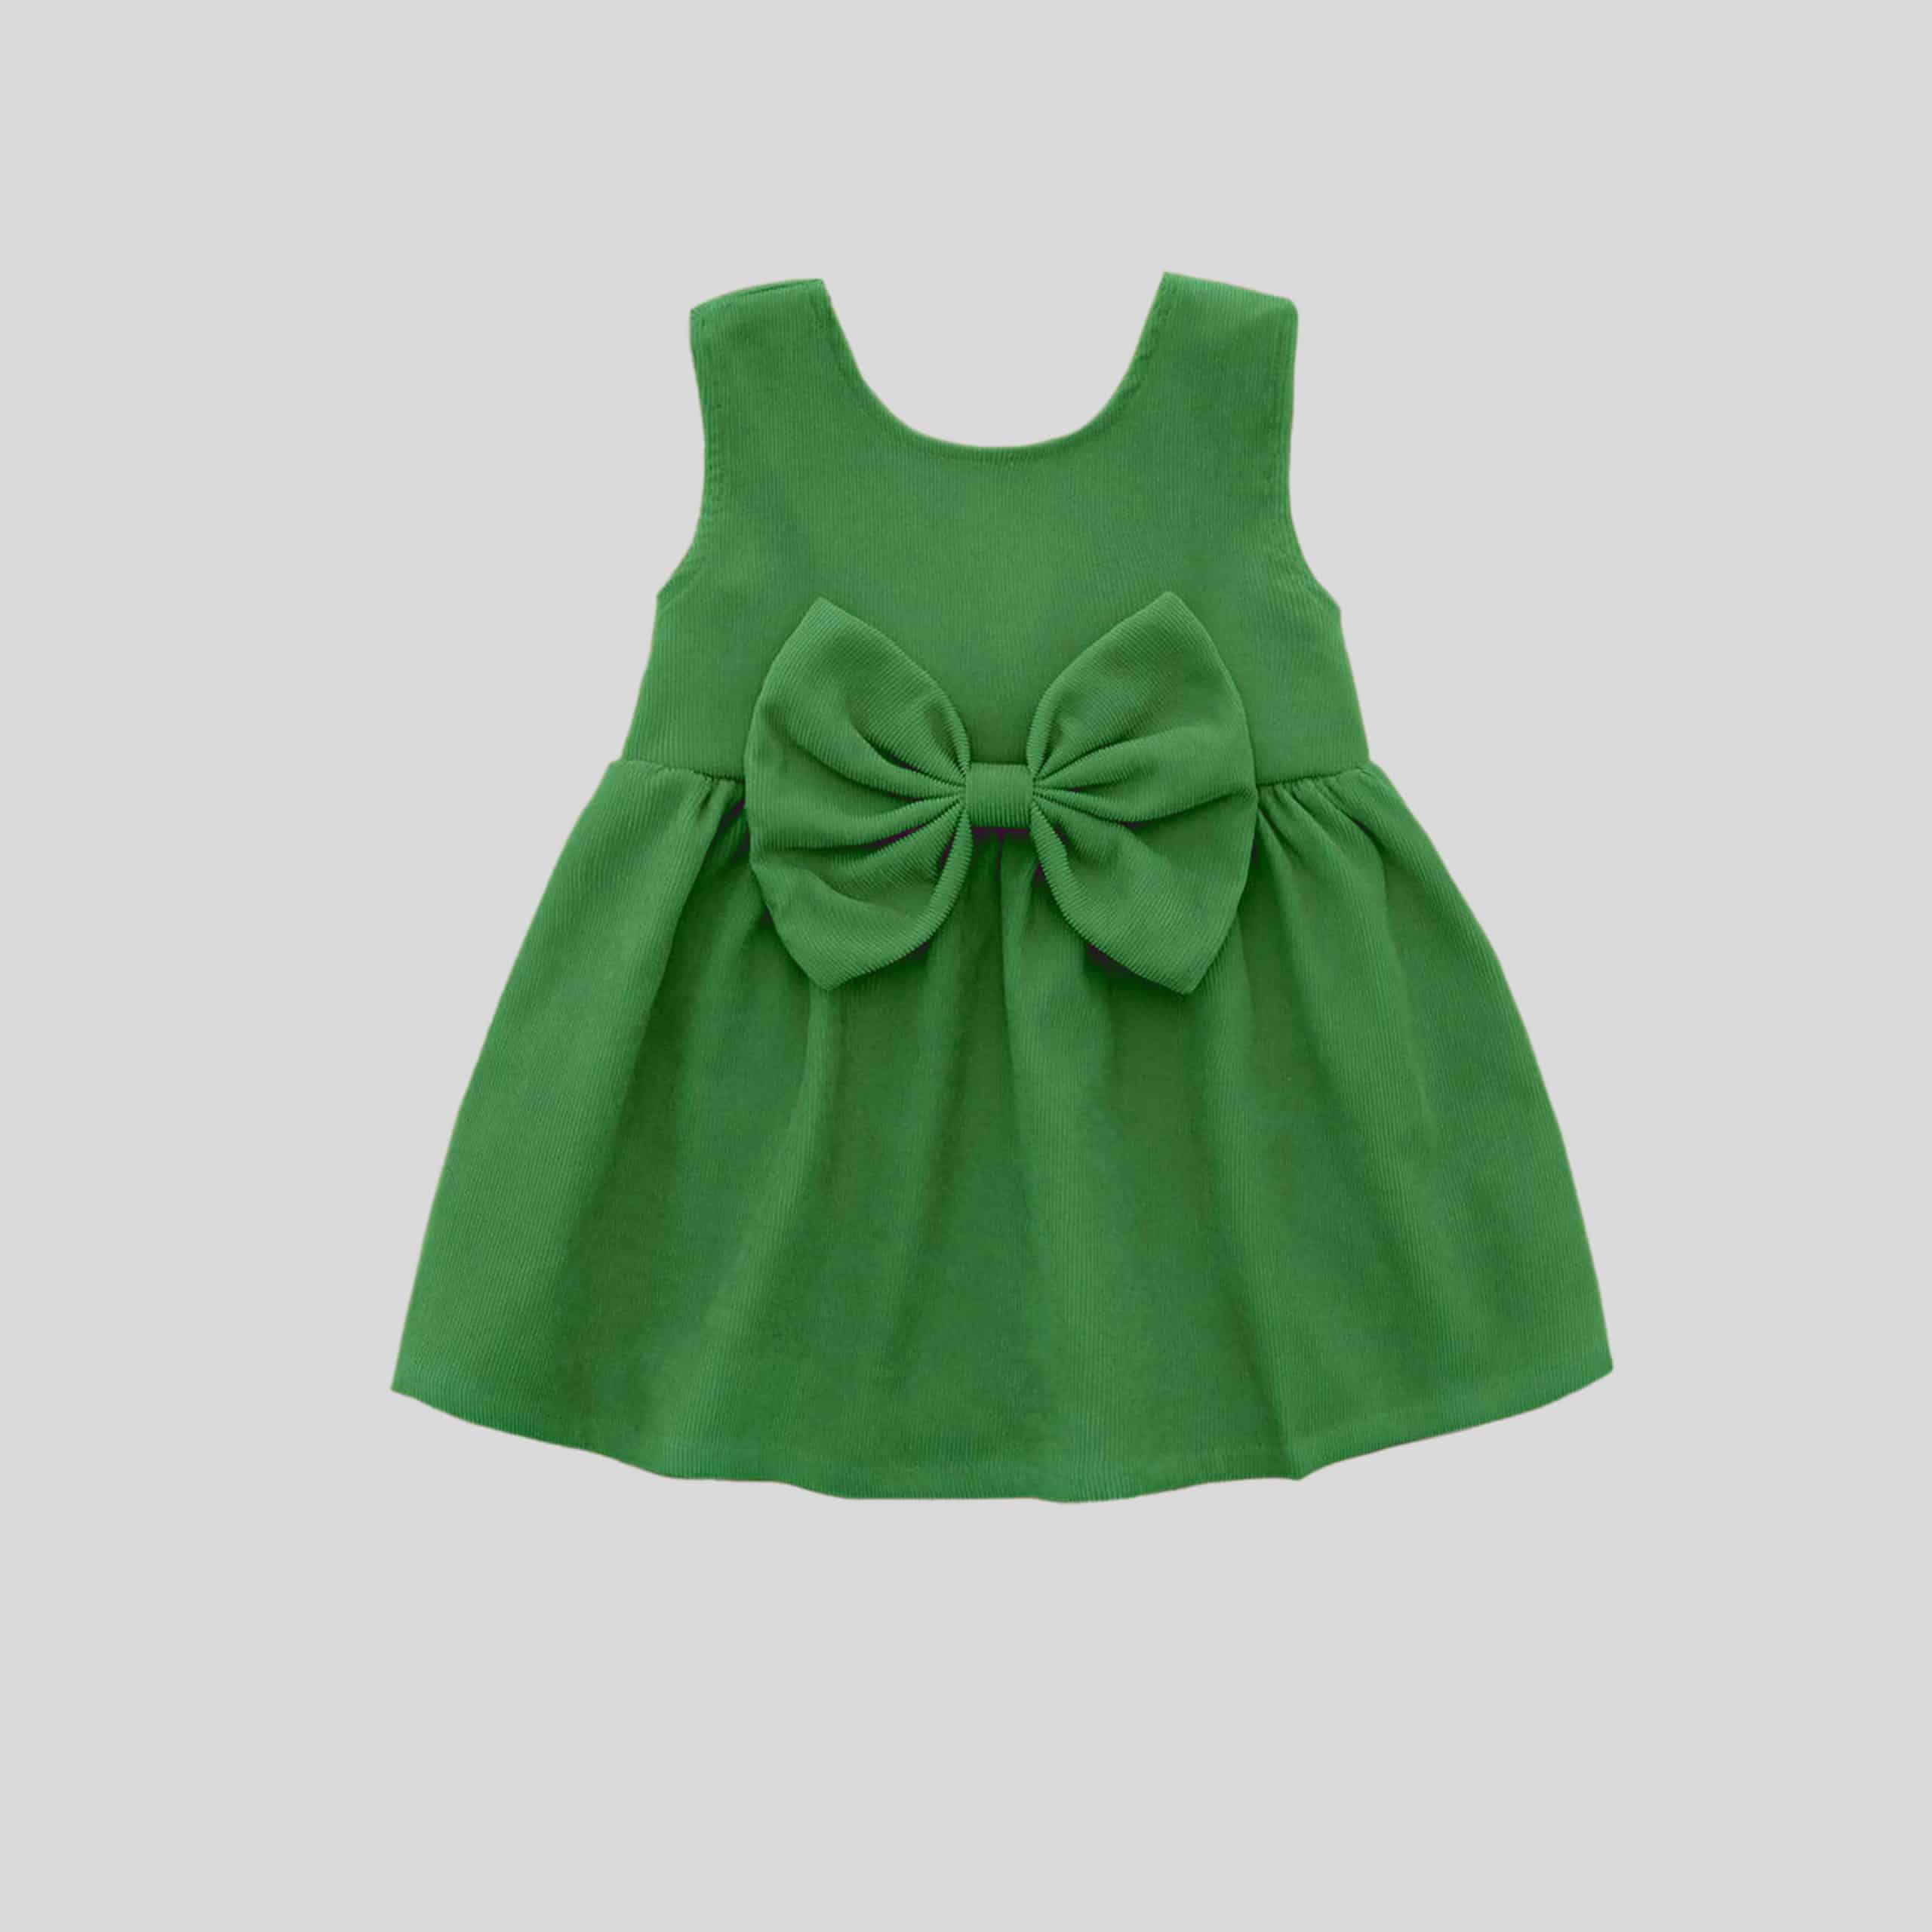 Forest green sleeveless dress with bow - RKFCW150